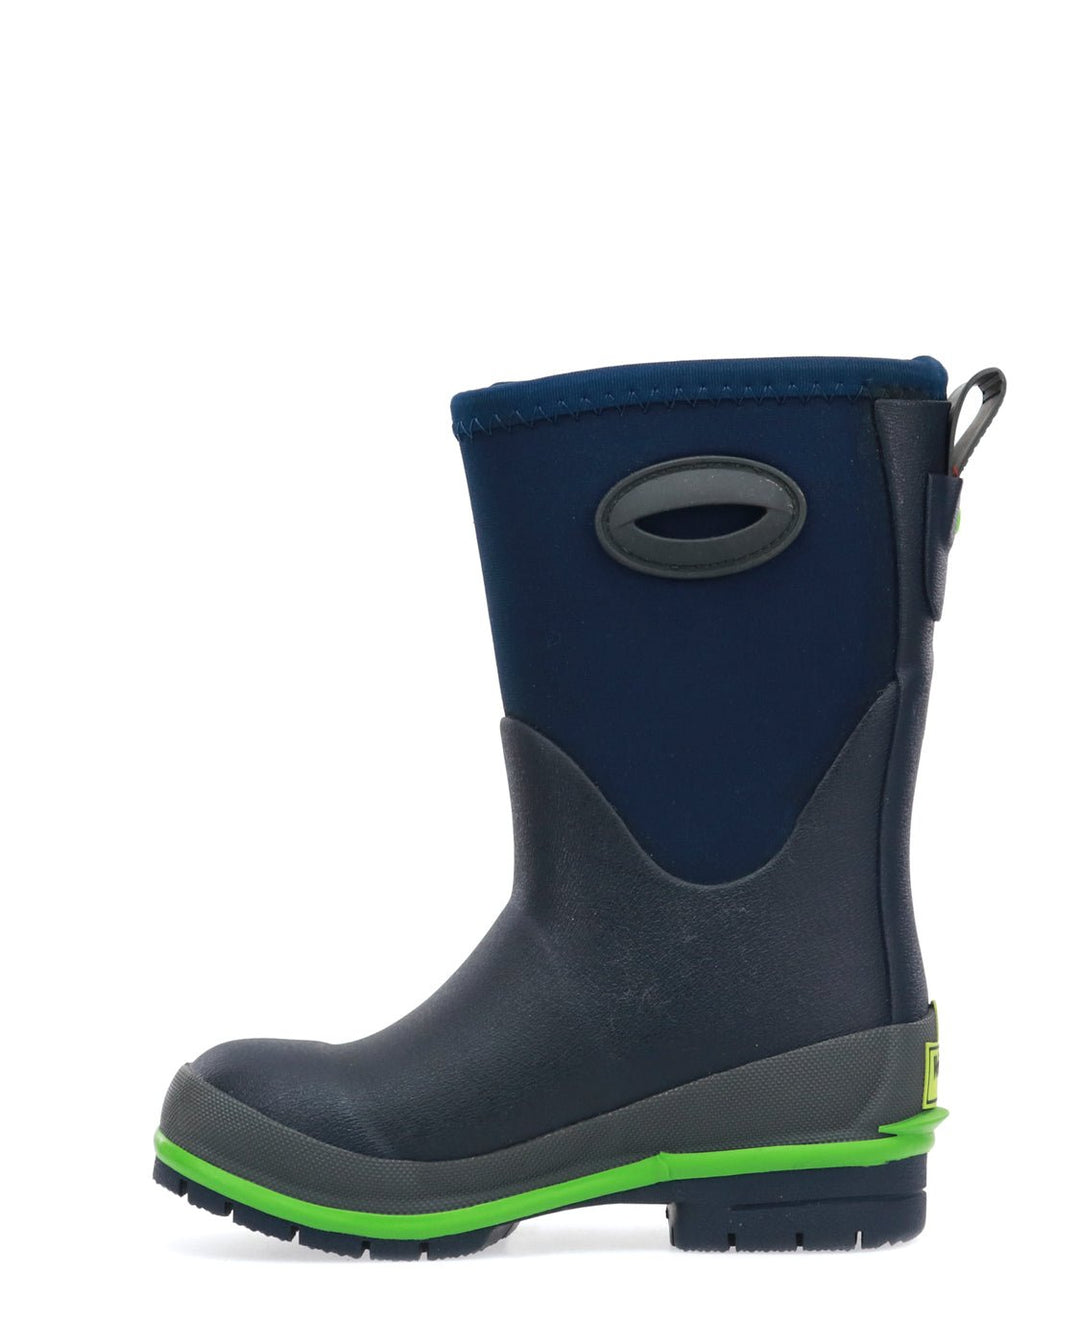 Kids Youth Neoprene Cold Weather Boot - Navy - Western Chief